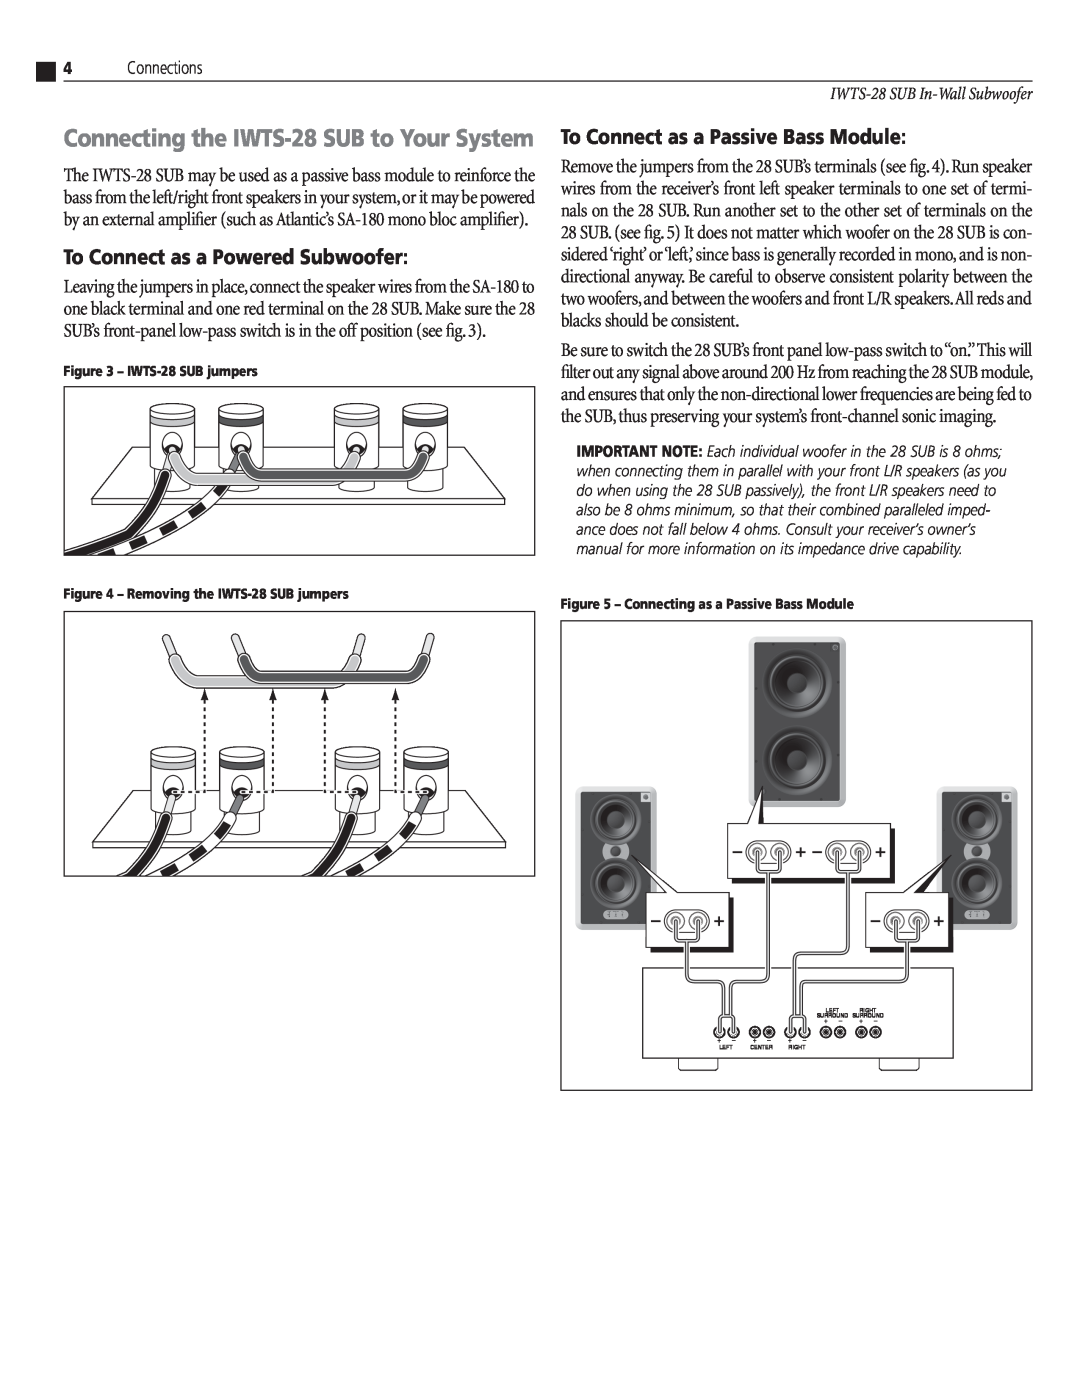 Atlantic Technology IWTS-28 SUB instruction manual To Connect as a Powered Subwoofer, To Connect as a Passive Bass Module 